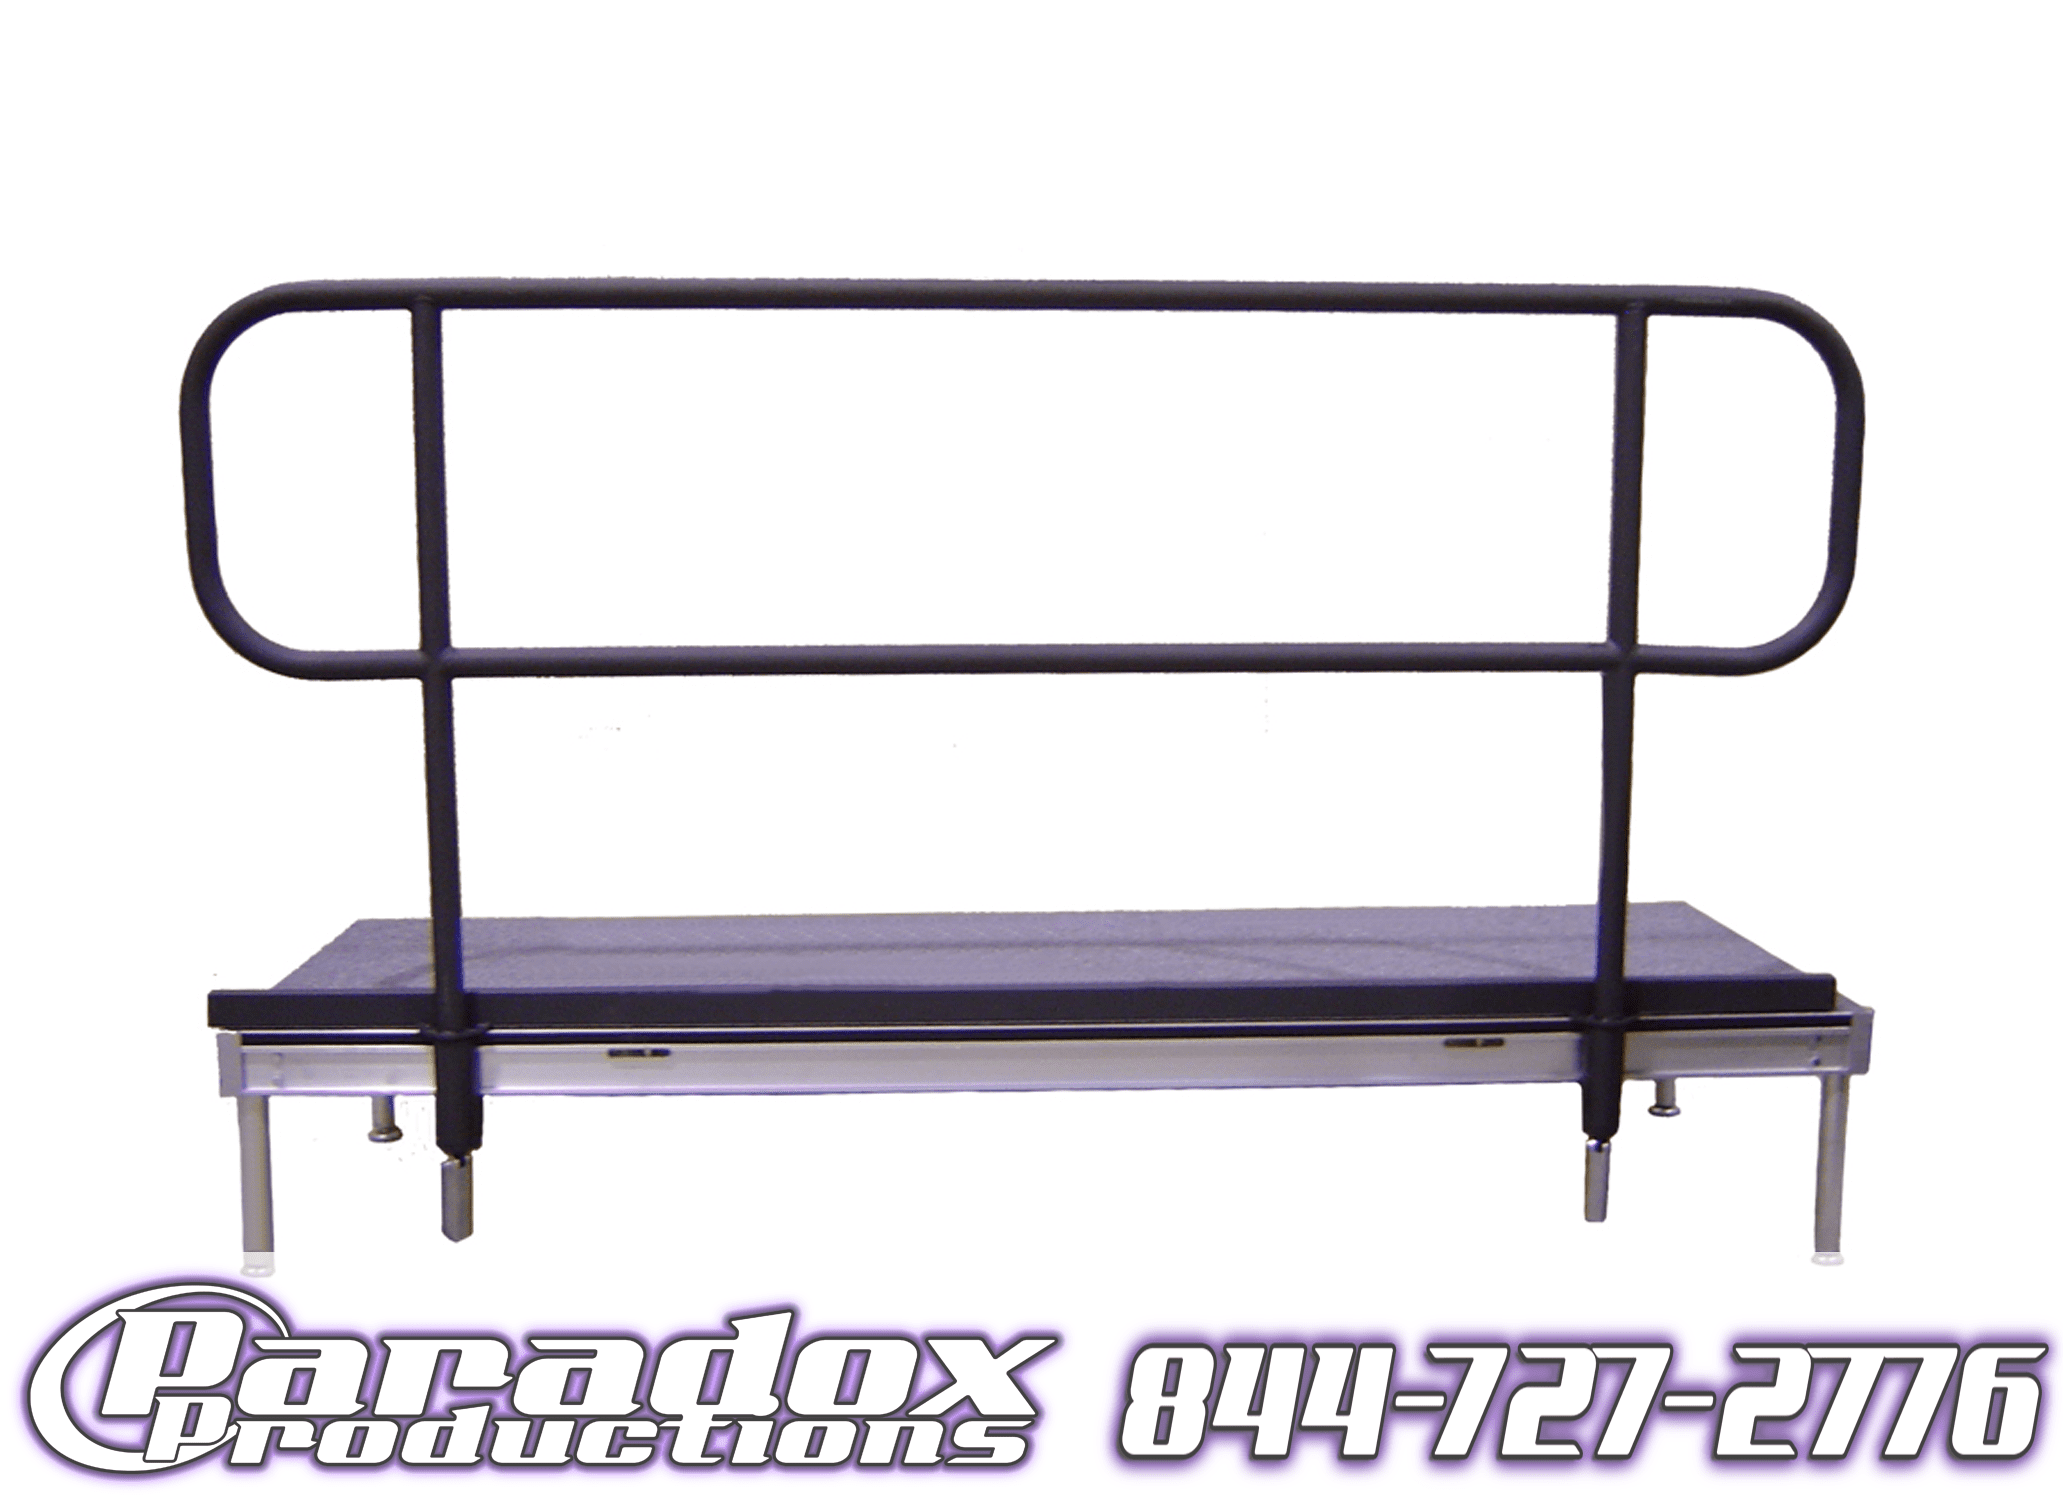 An 8' Stage Railing with a black handle available for stage rentals.